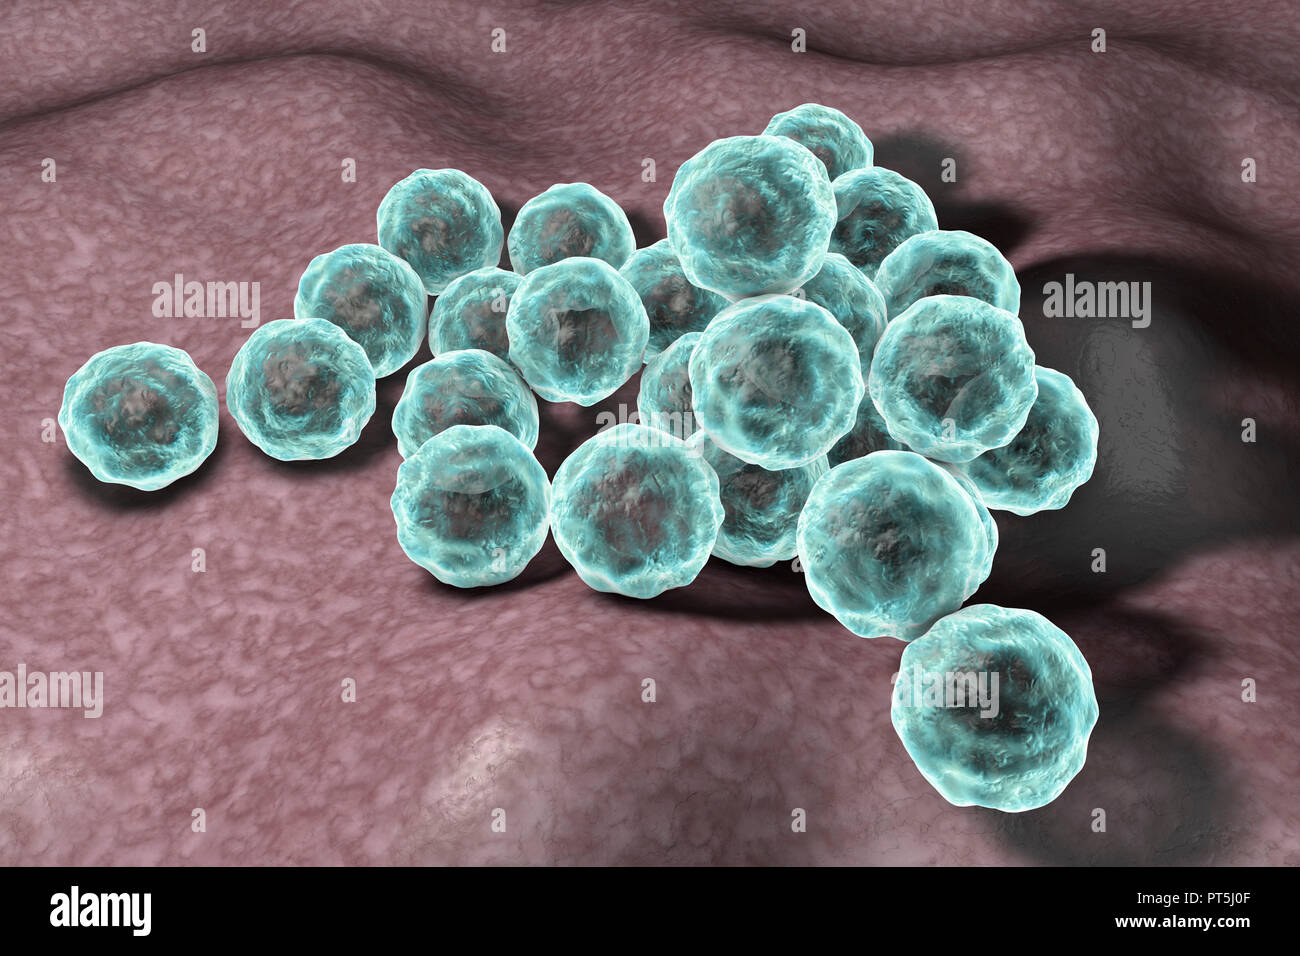 Chlamydia trachomatis bacteria, computer illustration. Chlamydia trachomatis causes a sexually transmitted infection that can go undetected causing infertility. It also causes the eye disease trachoma, which can lead to blindness. Stock Photo